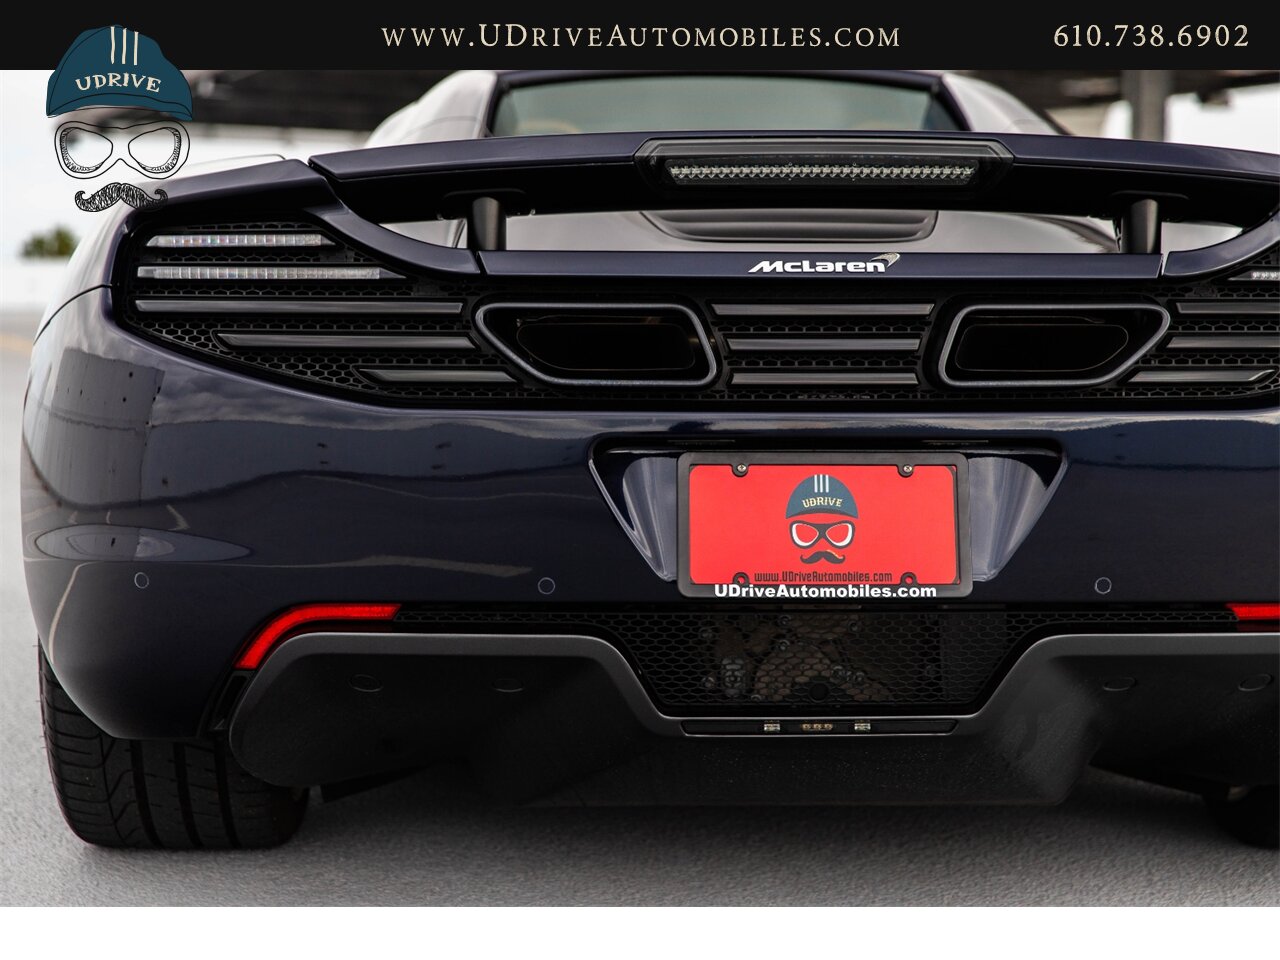 2013 McLaren MP4-12C Spider 1 Owner 6k Miles Carbon Fiber Full Leather  Sapphire Black over Natural Tan Leather - Photo 23 - West Chester, PA 19382